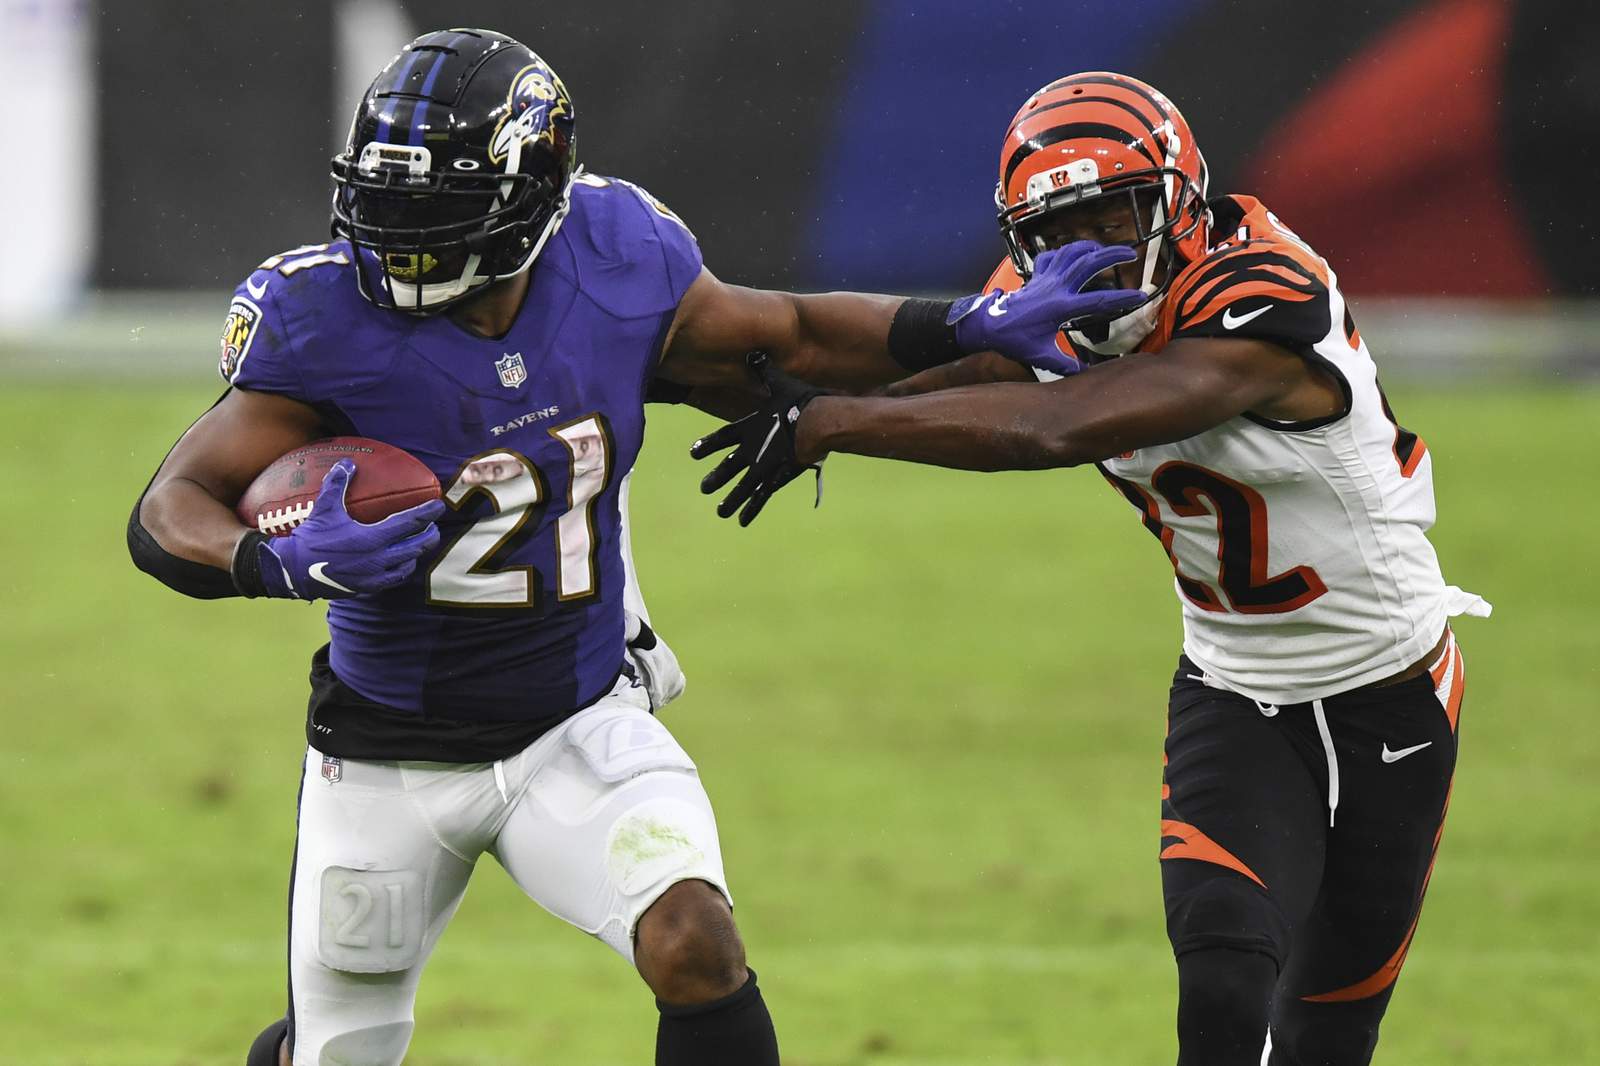 AP Source: RB Ingram agrees to one-year deal with Texans